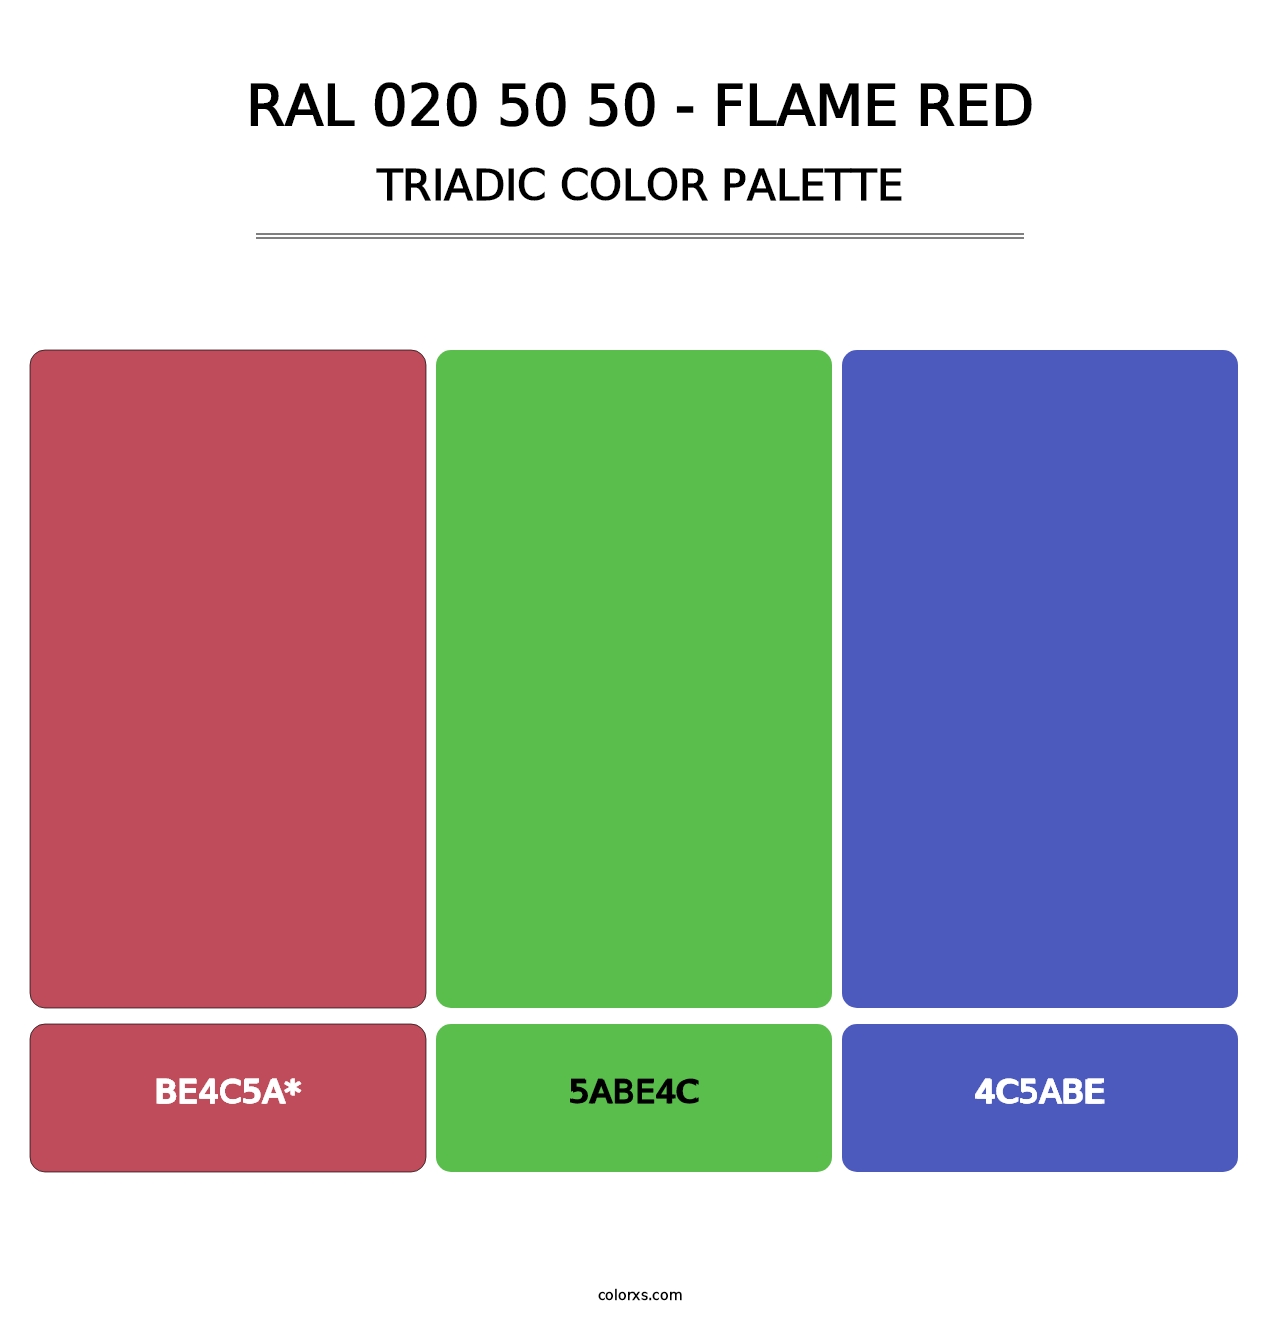 RAL 020 50 50 - Flame Red - Triadic Color Palette